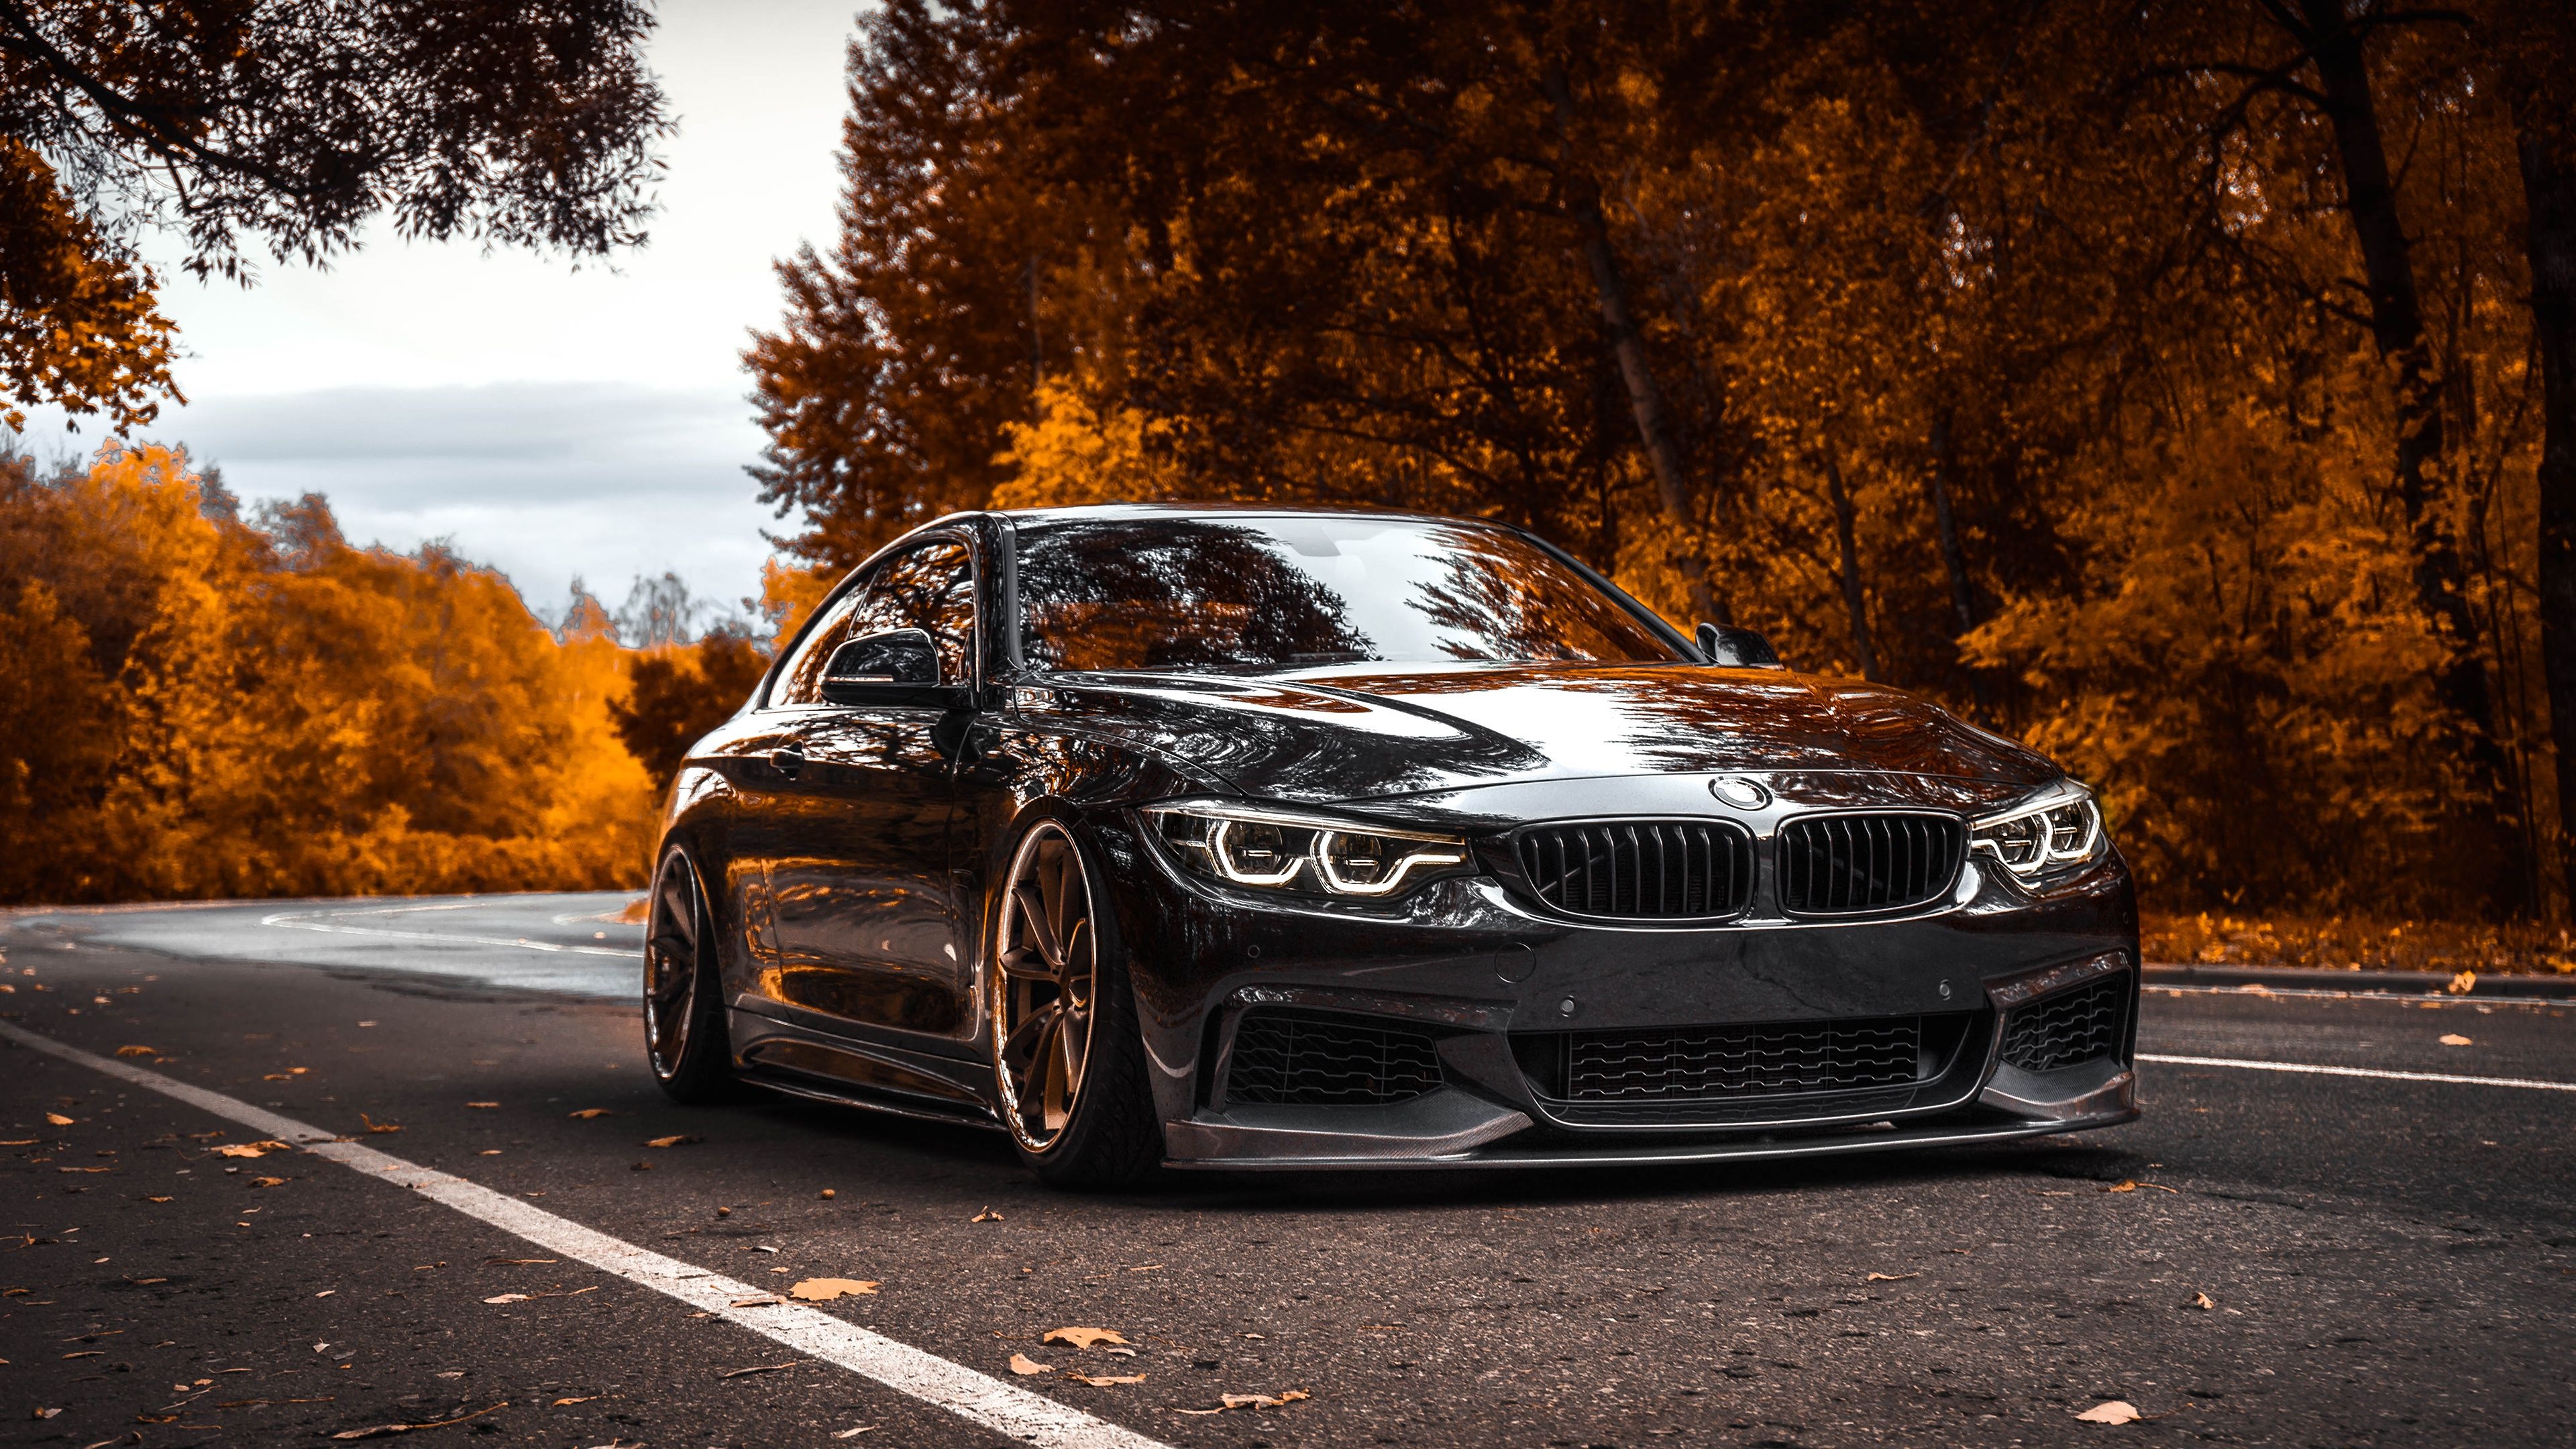 4k Cars BMW Wallpapers - Wallpaper Cave